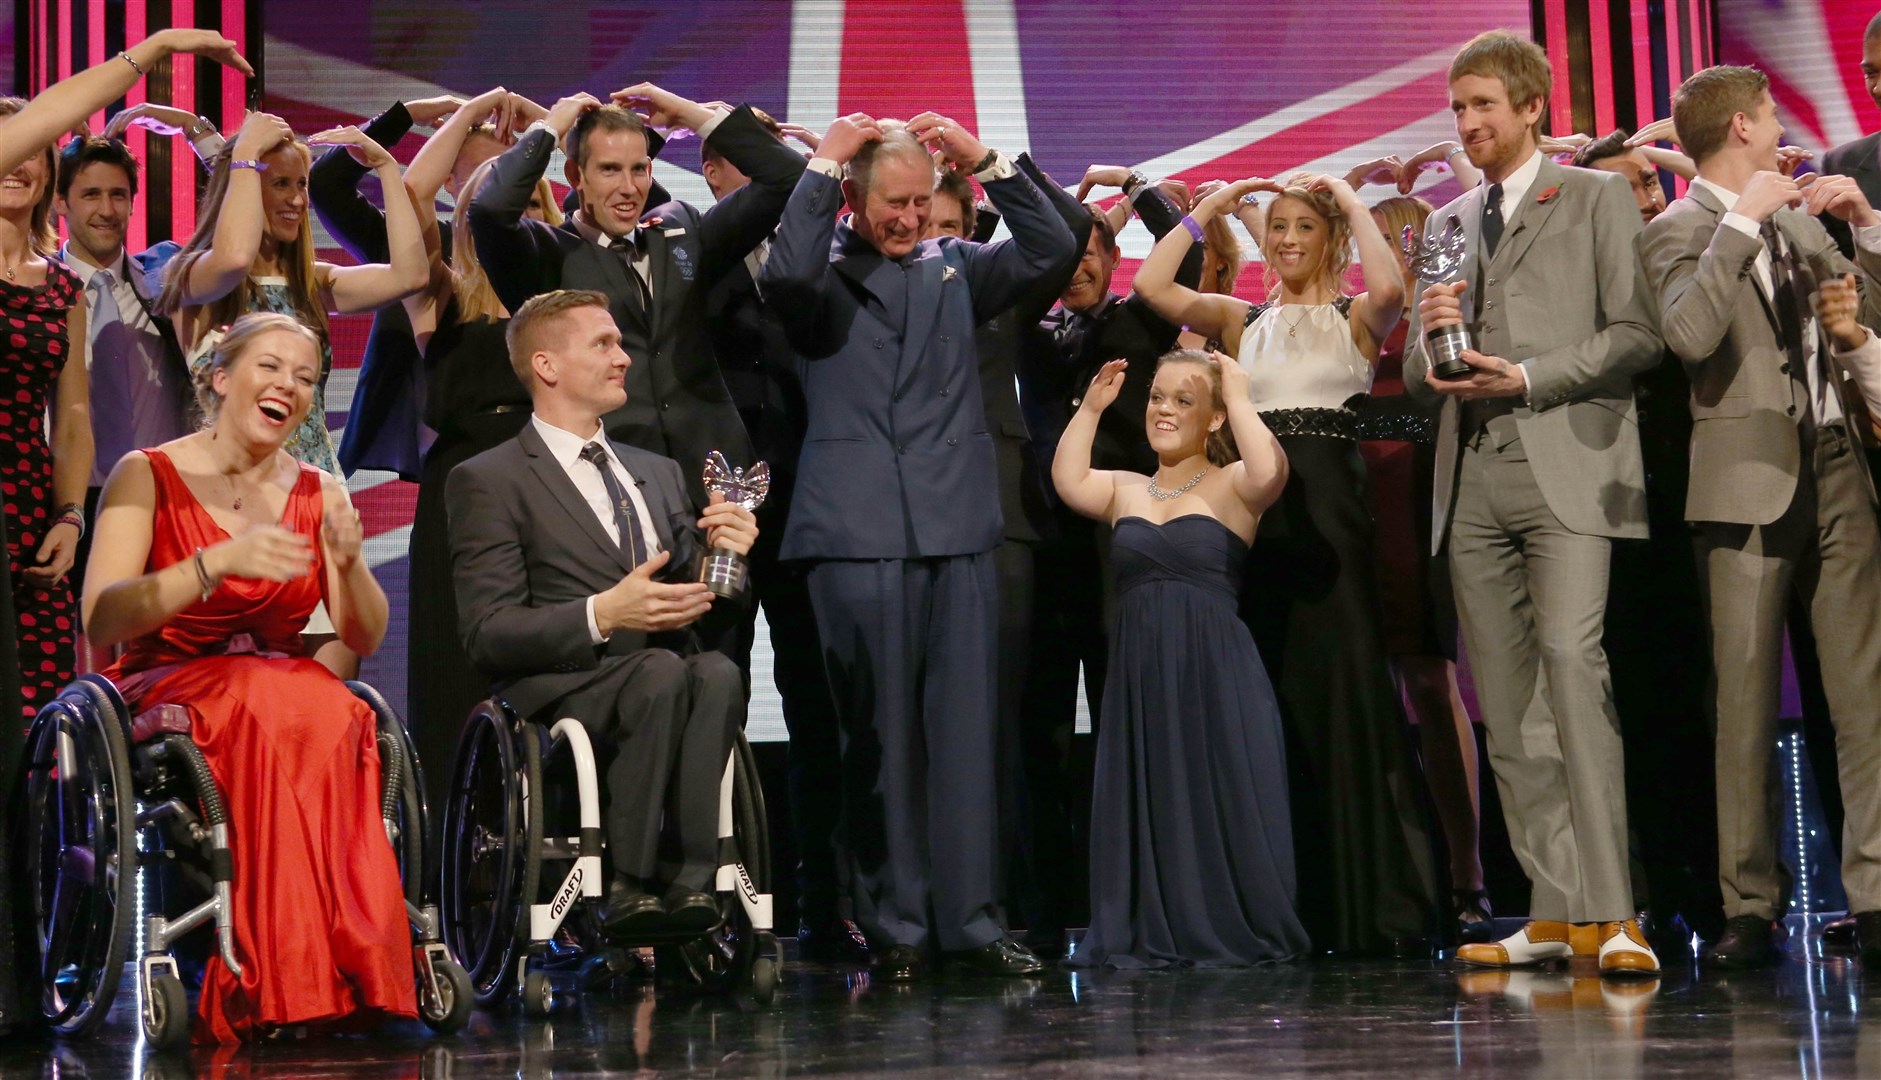 Charles with members of Team GB and Paralympic GB doing the ‘Mobot’ at the Pride of Britain Awards in 2012 (Ian Vogler/Daily Mirror/PA)